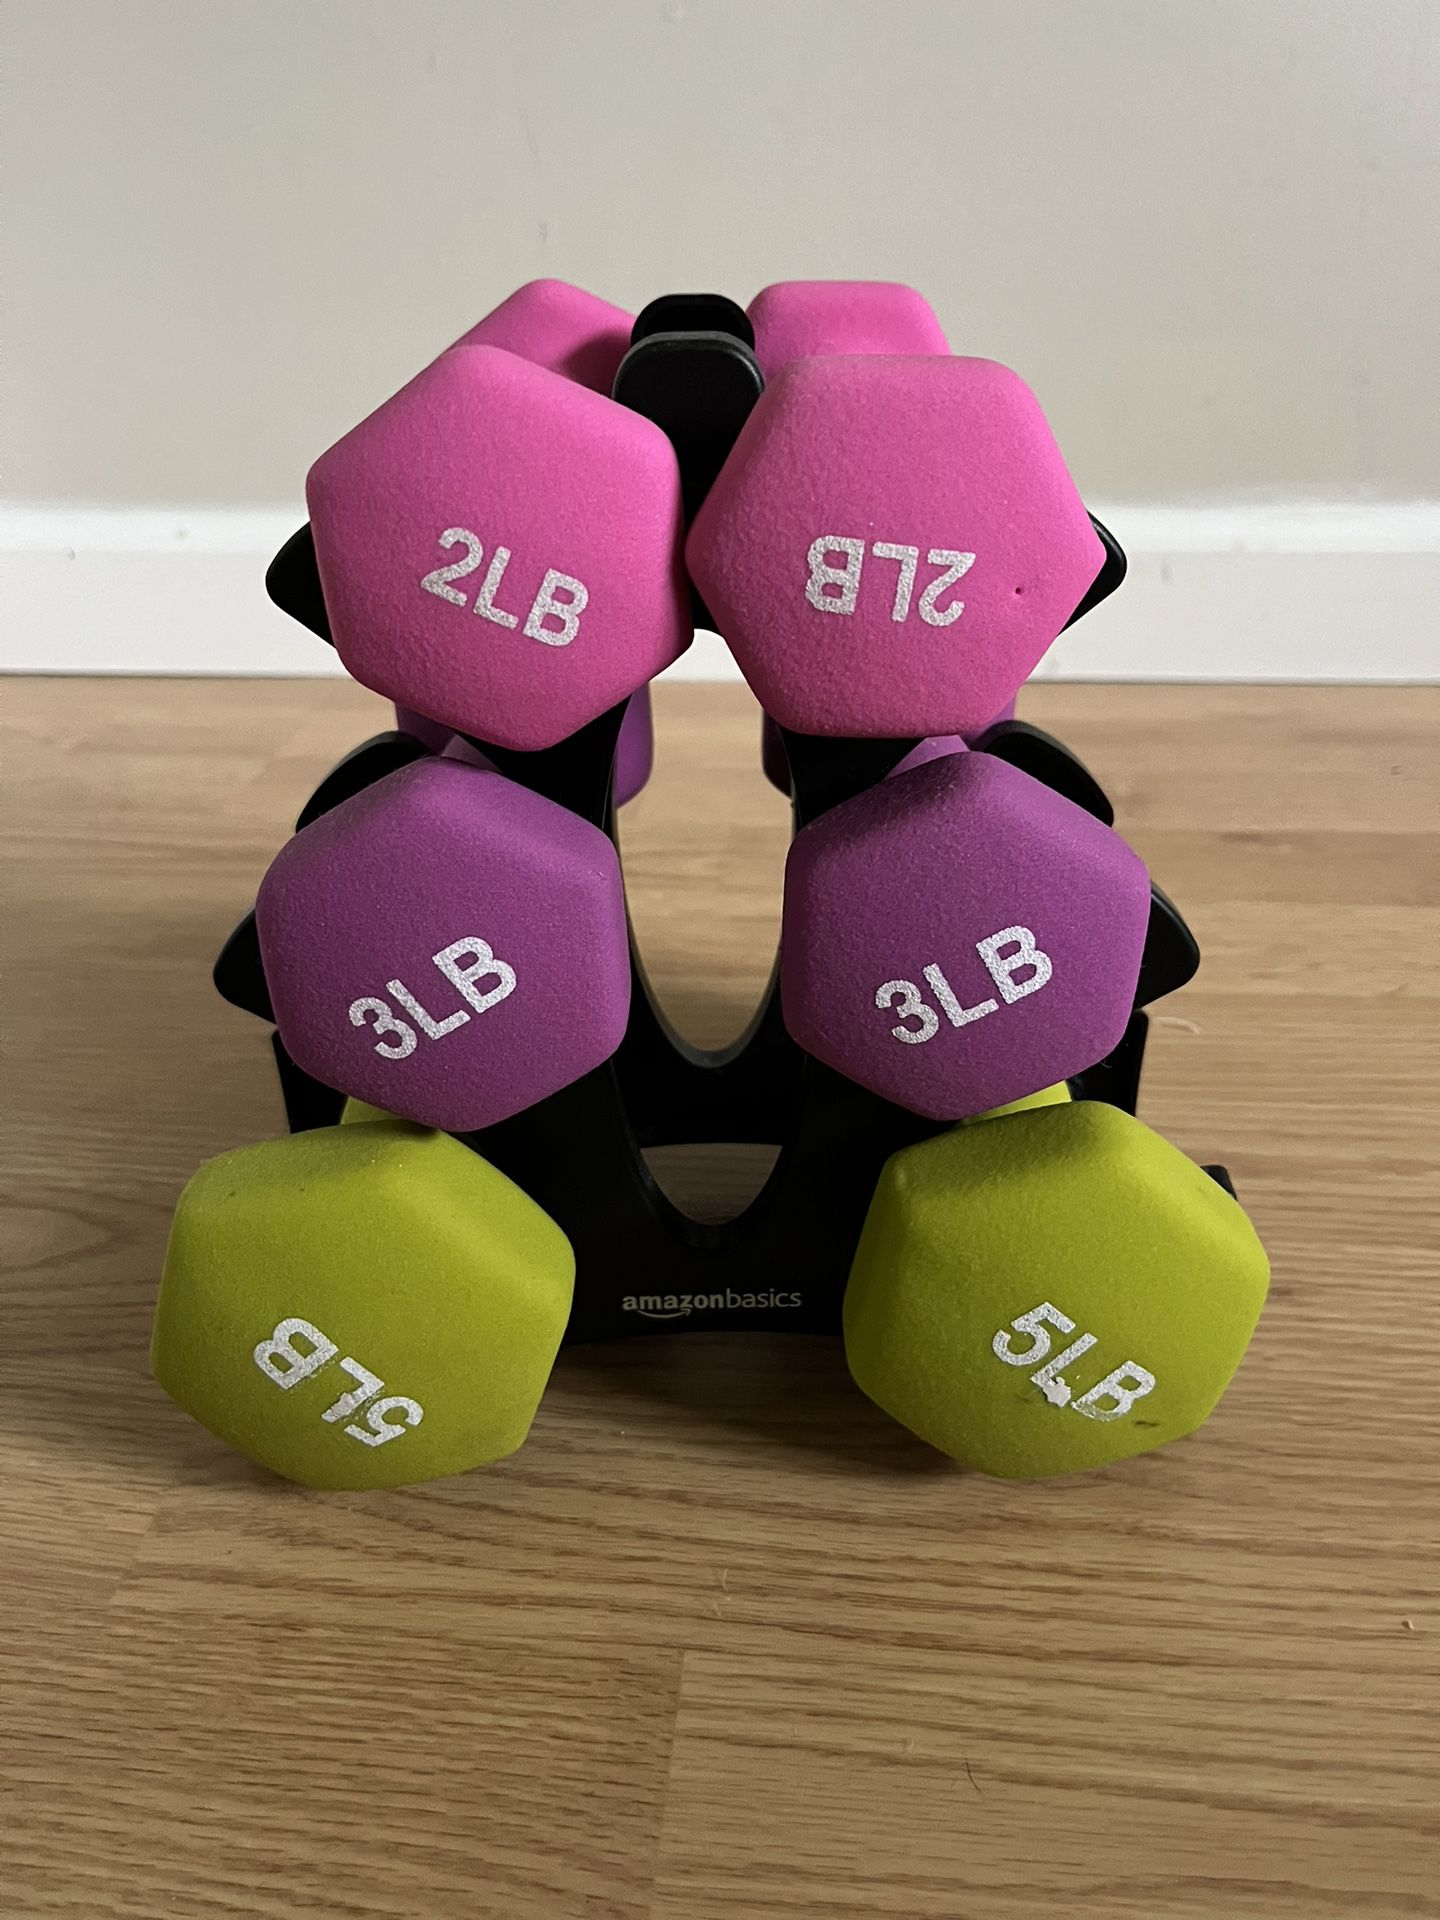 Dumbbell Hand Weights